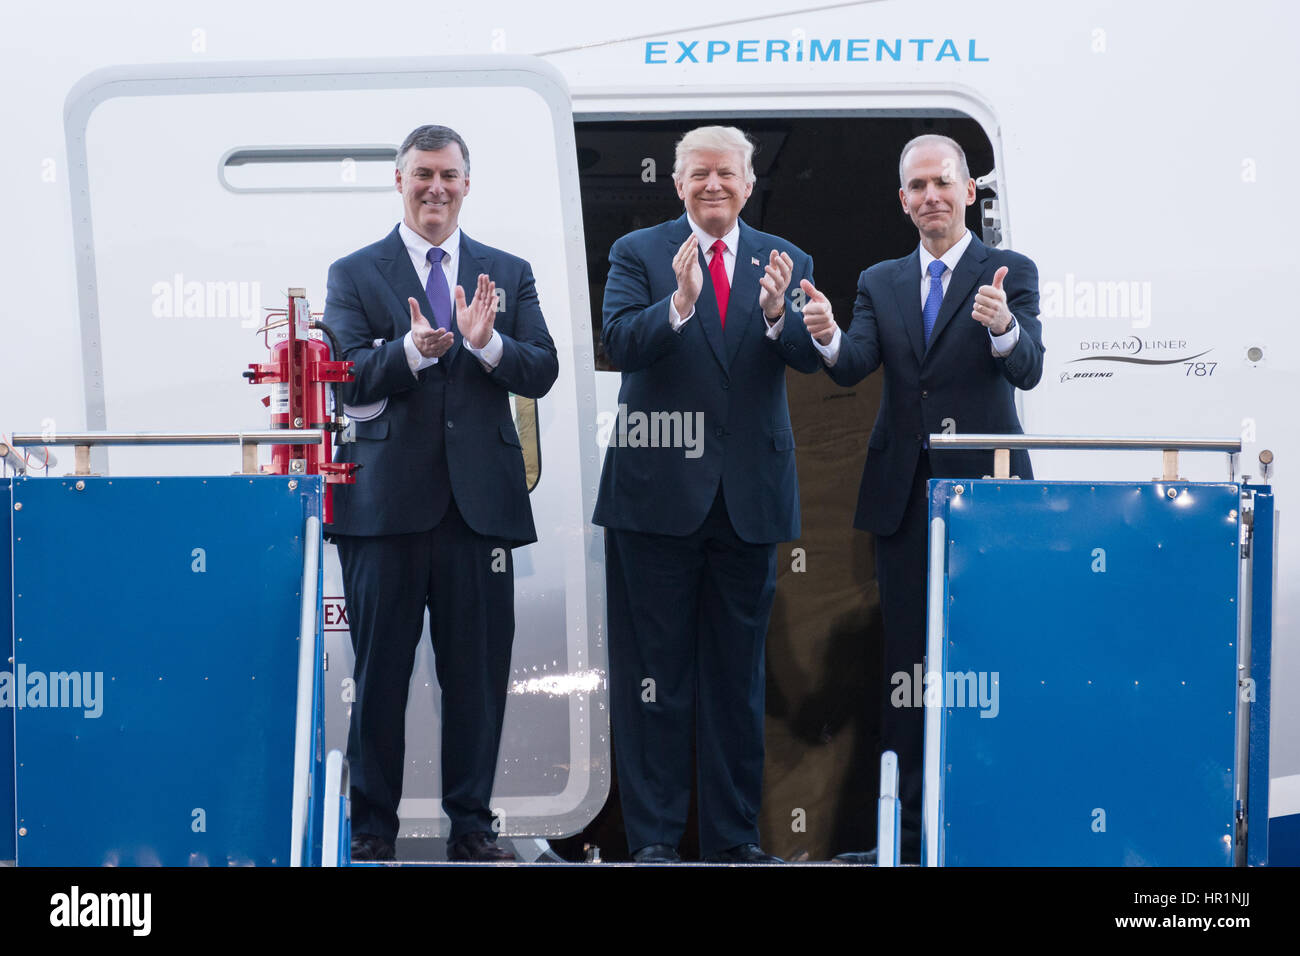 U.S. President Donald Trump with Boeing CEO Dennis Muilenburg, right, and Boeing Commercial Aircraft CEO Kevin McAllister, left, after touring the new Boeing 787-10 Dreamliner aircraft at the Boeing factory February 17, 2016 in North Charleston, SC. Trump is at the factory for the rollout of the new aircraft. Stock Photo